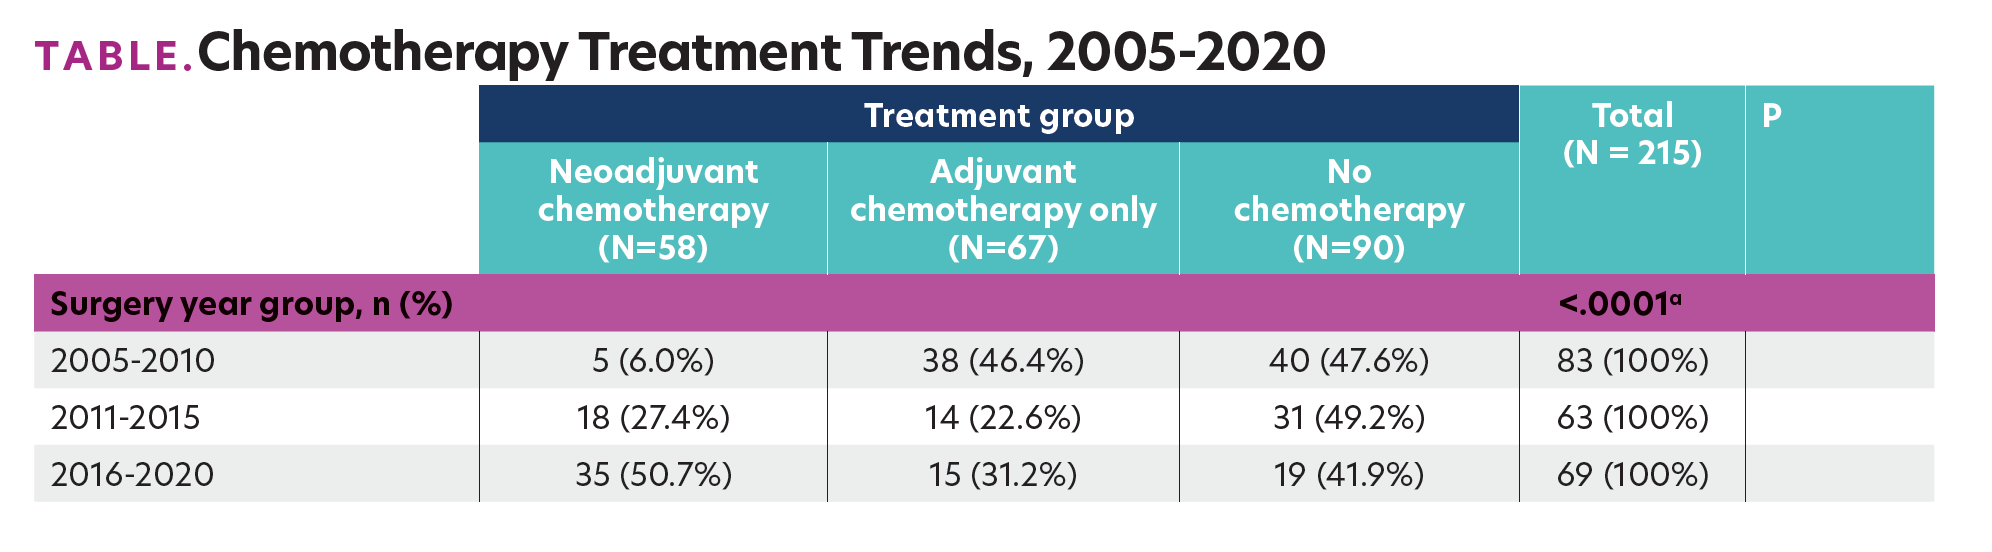 TABLE. Chemotherapy Treatment Trends, 2005-2020